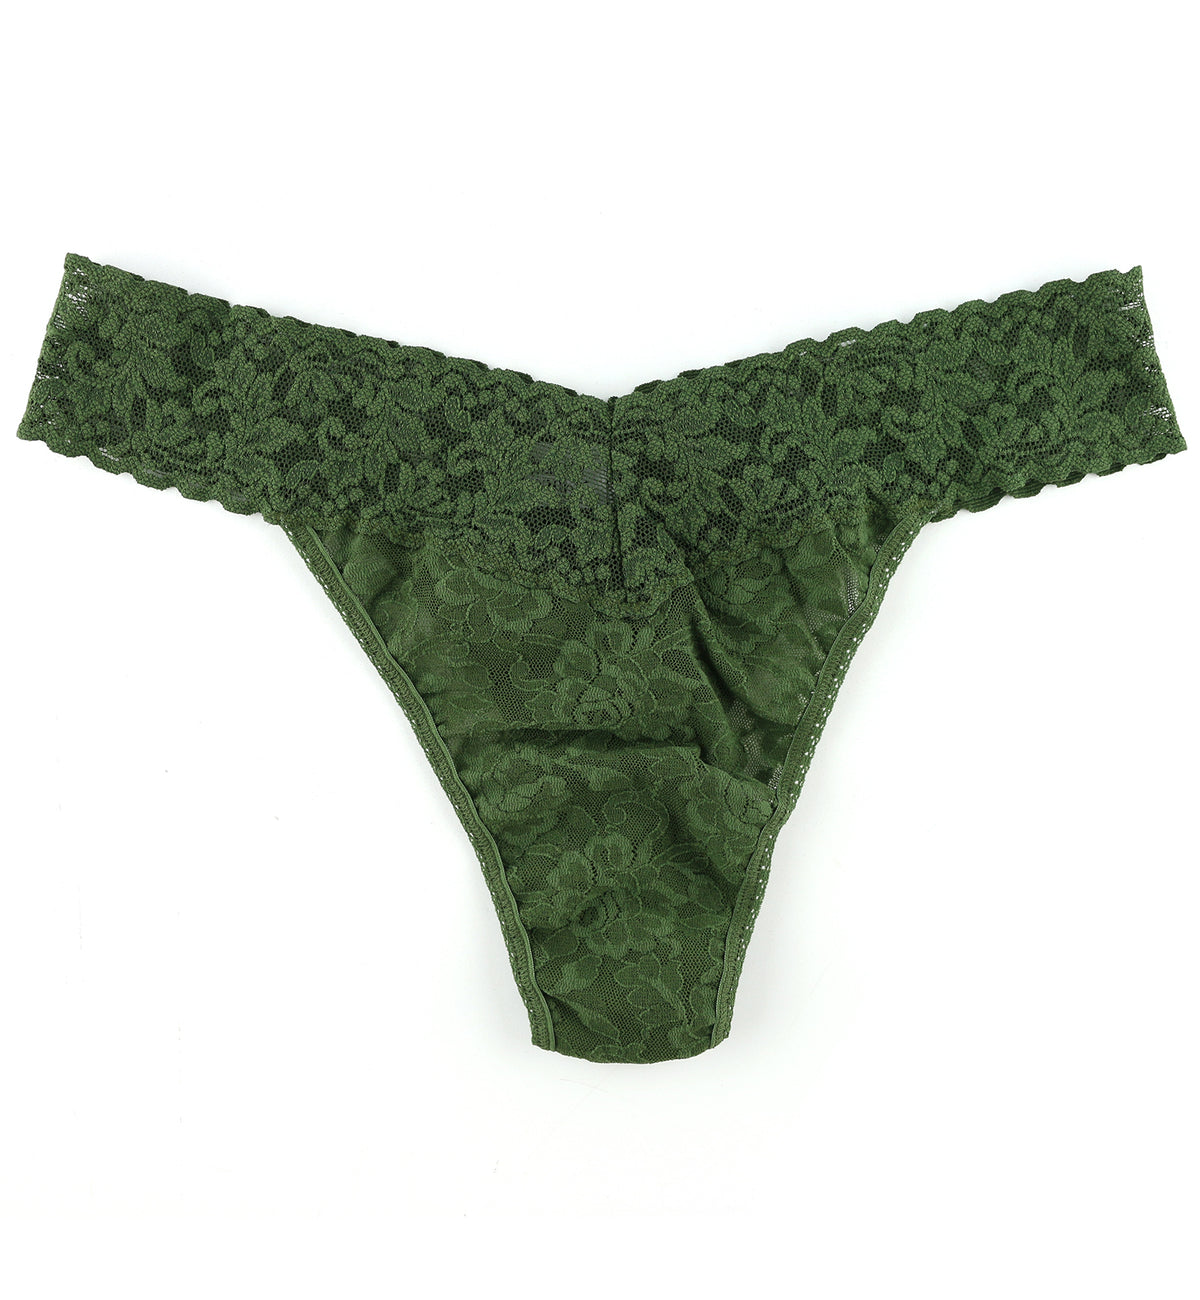 Hanky Panky Signature Lace Original Rise Thong (4811P),Bitter Olive - Bitter Olive,One Size